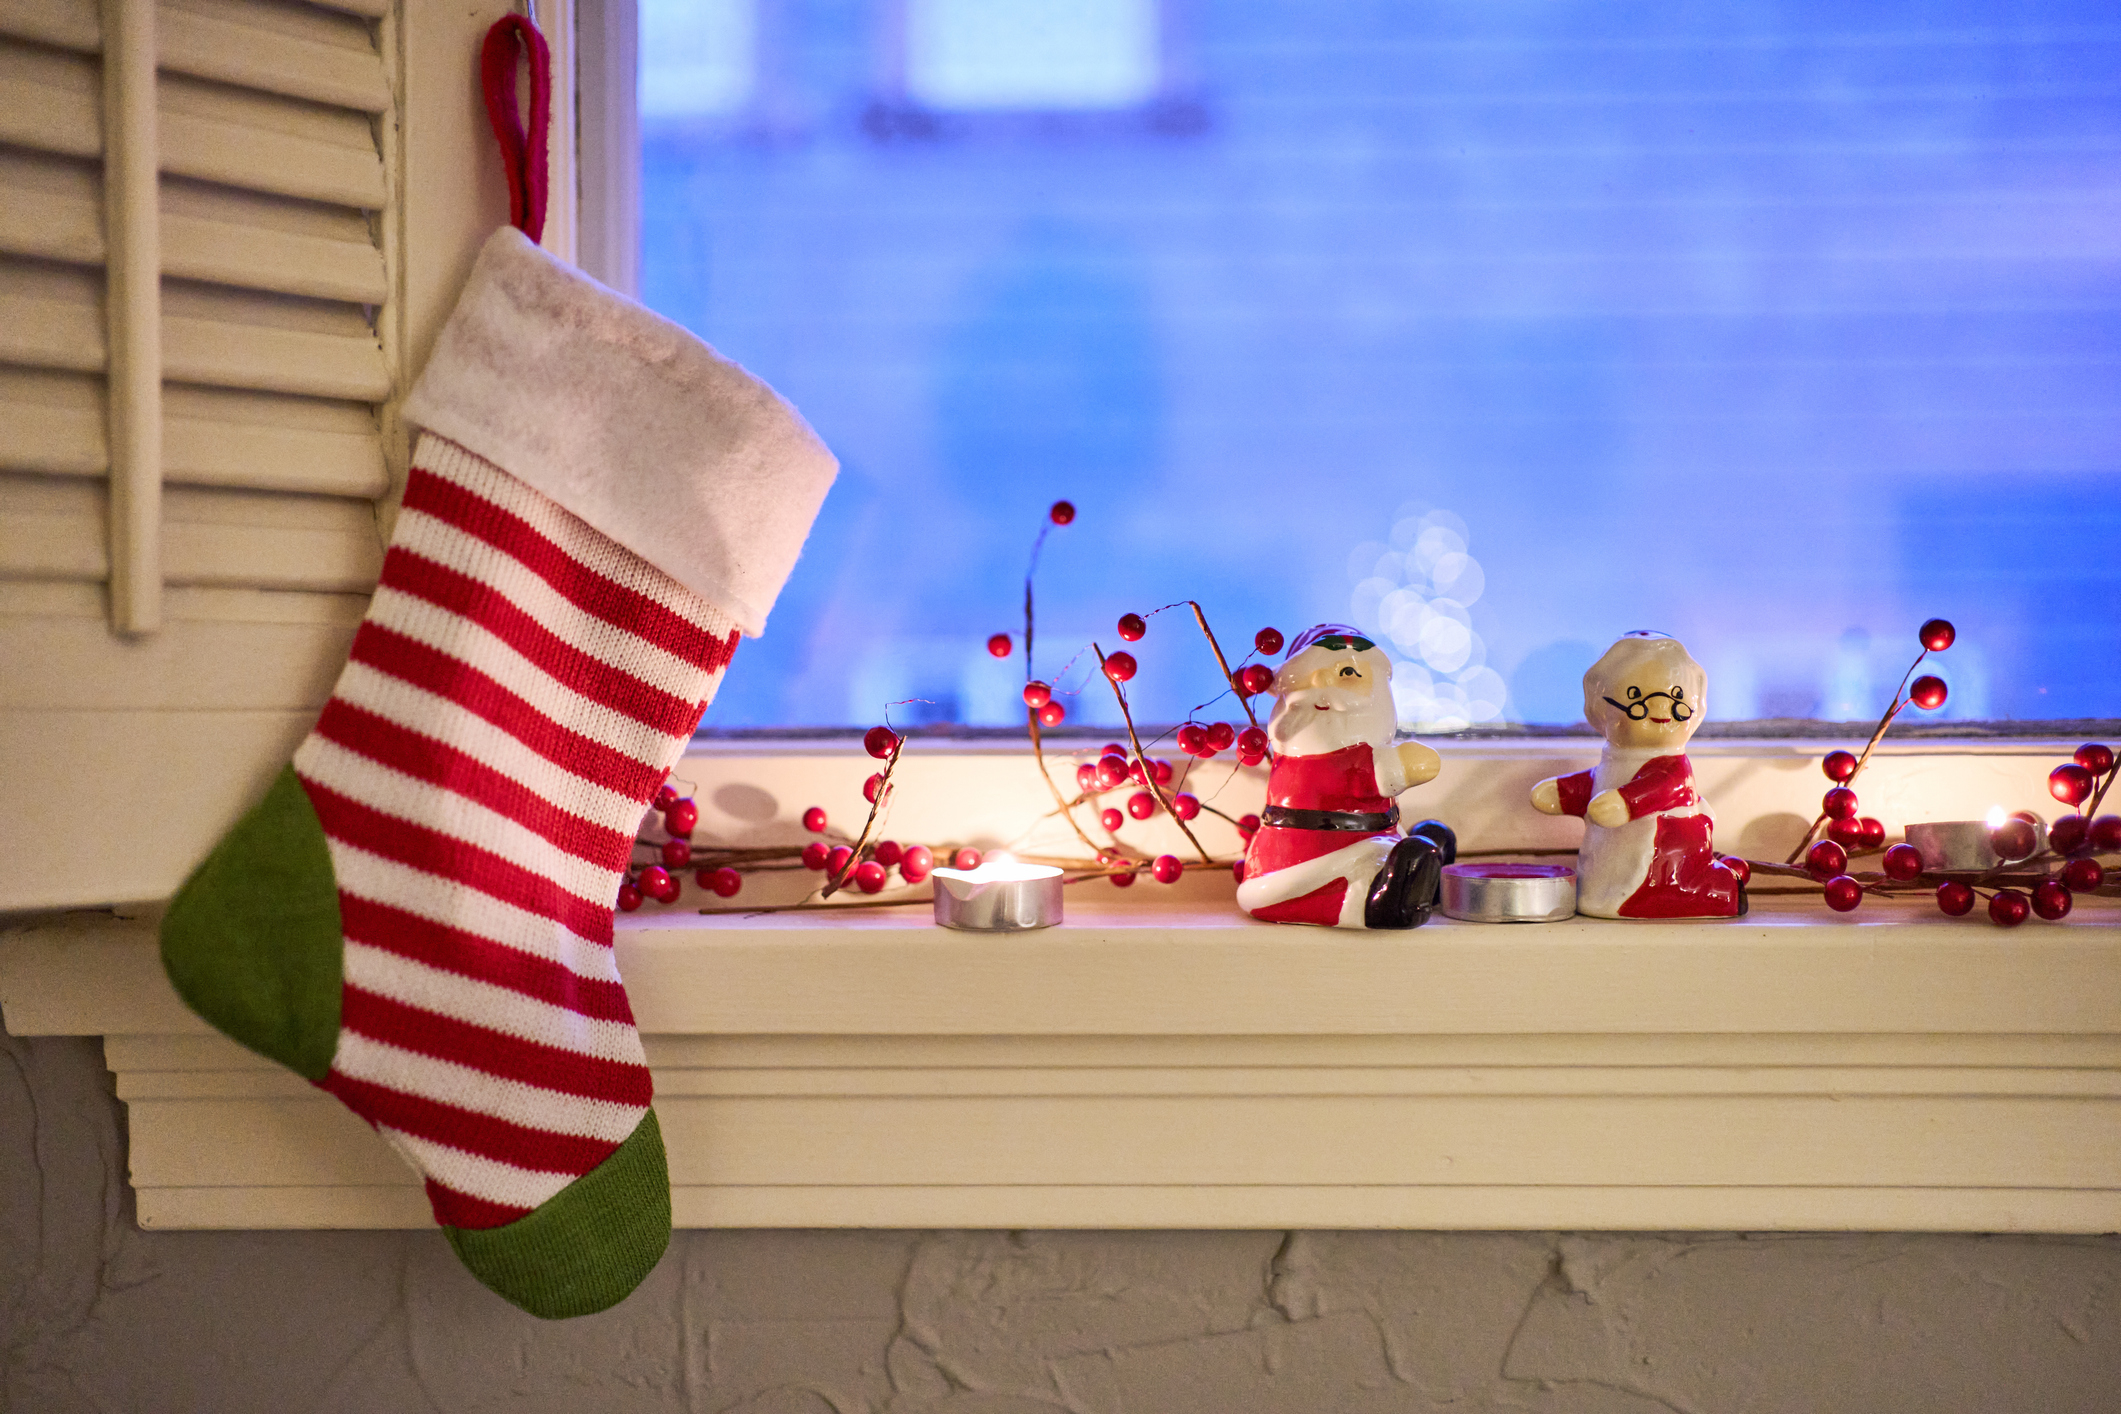 Holiday-themed window sill with a stocking, Santa figurine, and decorative items